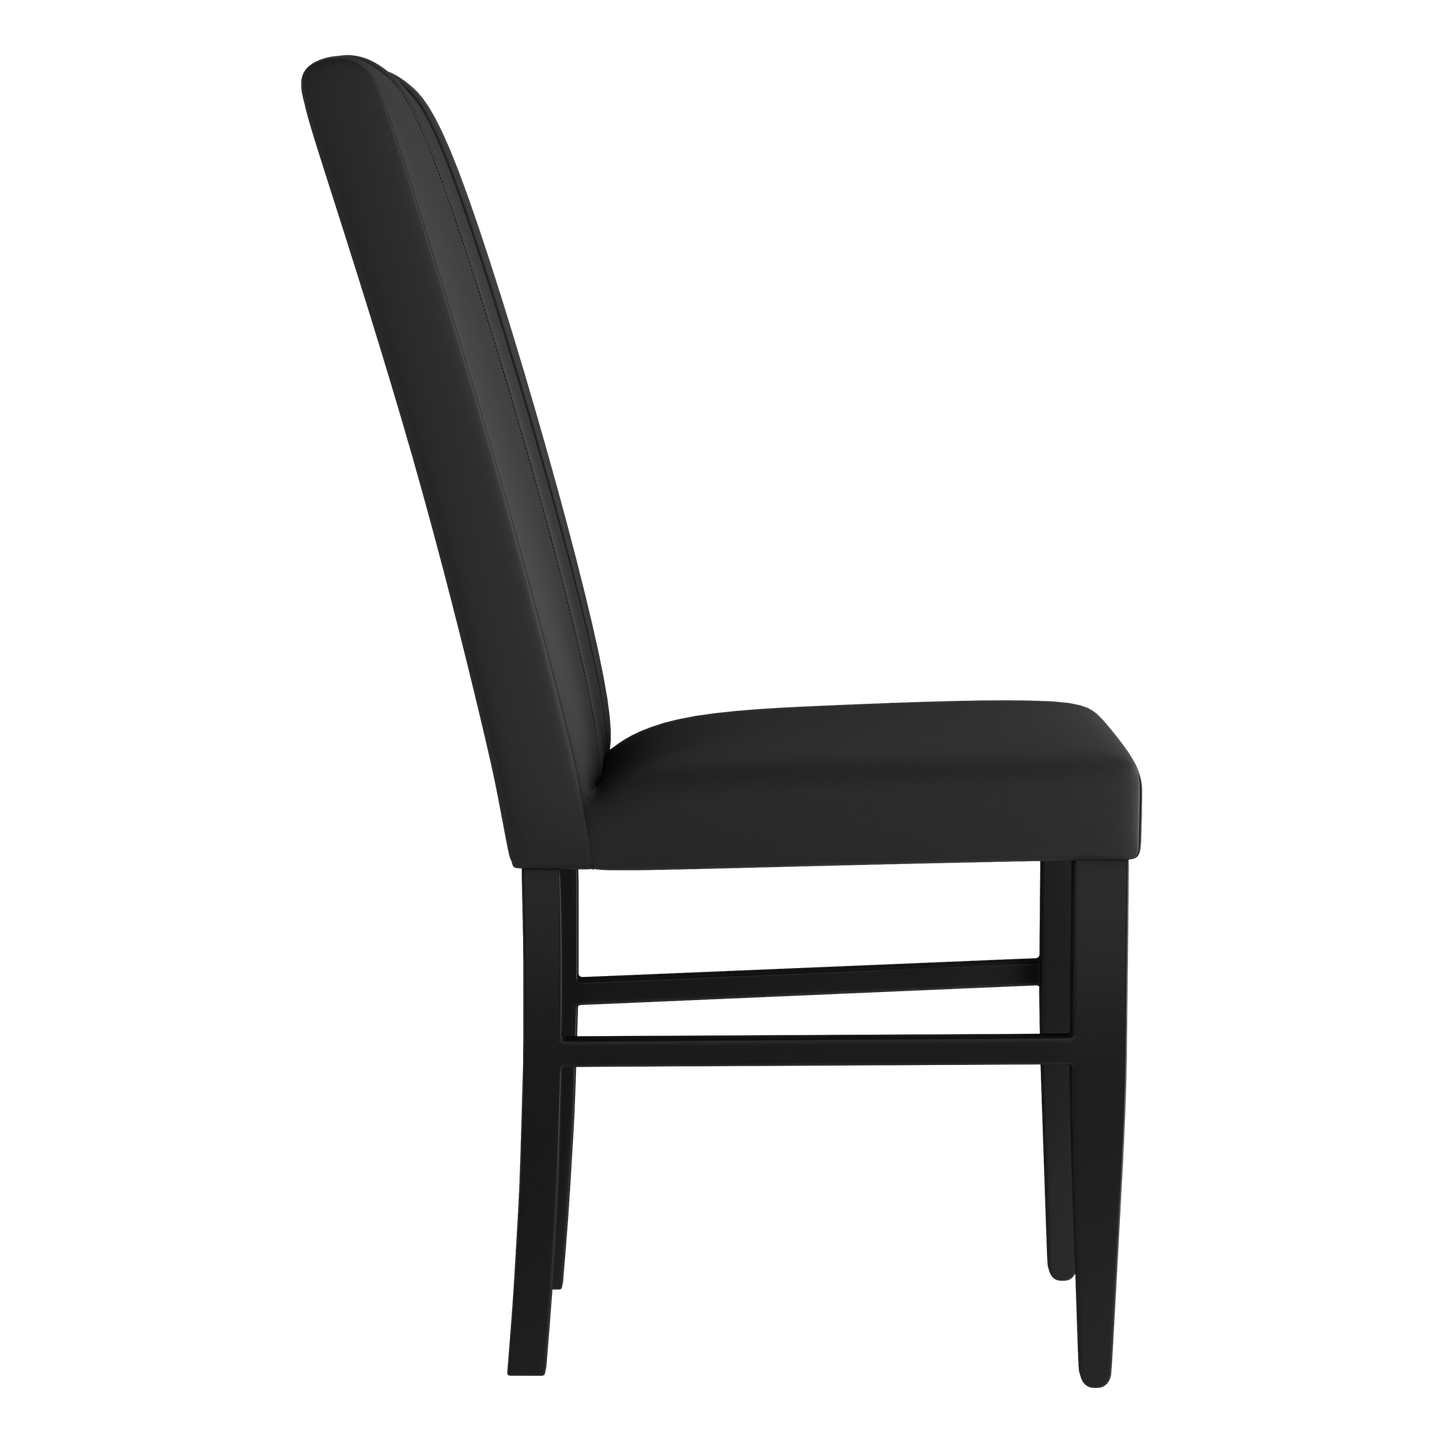 Side Chair 2000 with Oakland Athletics Logo Set of 2